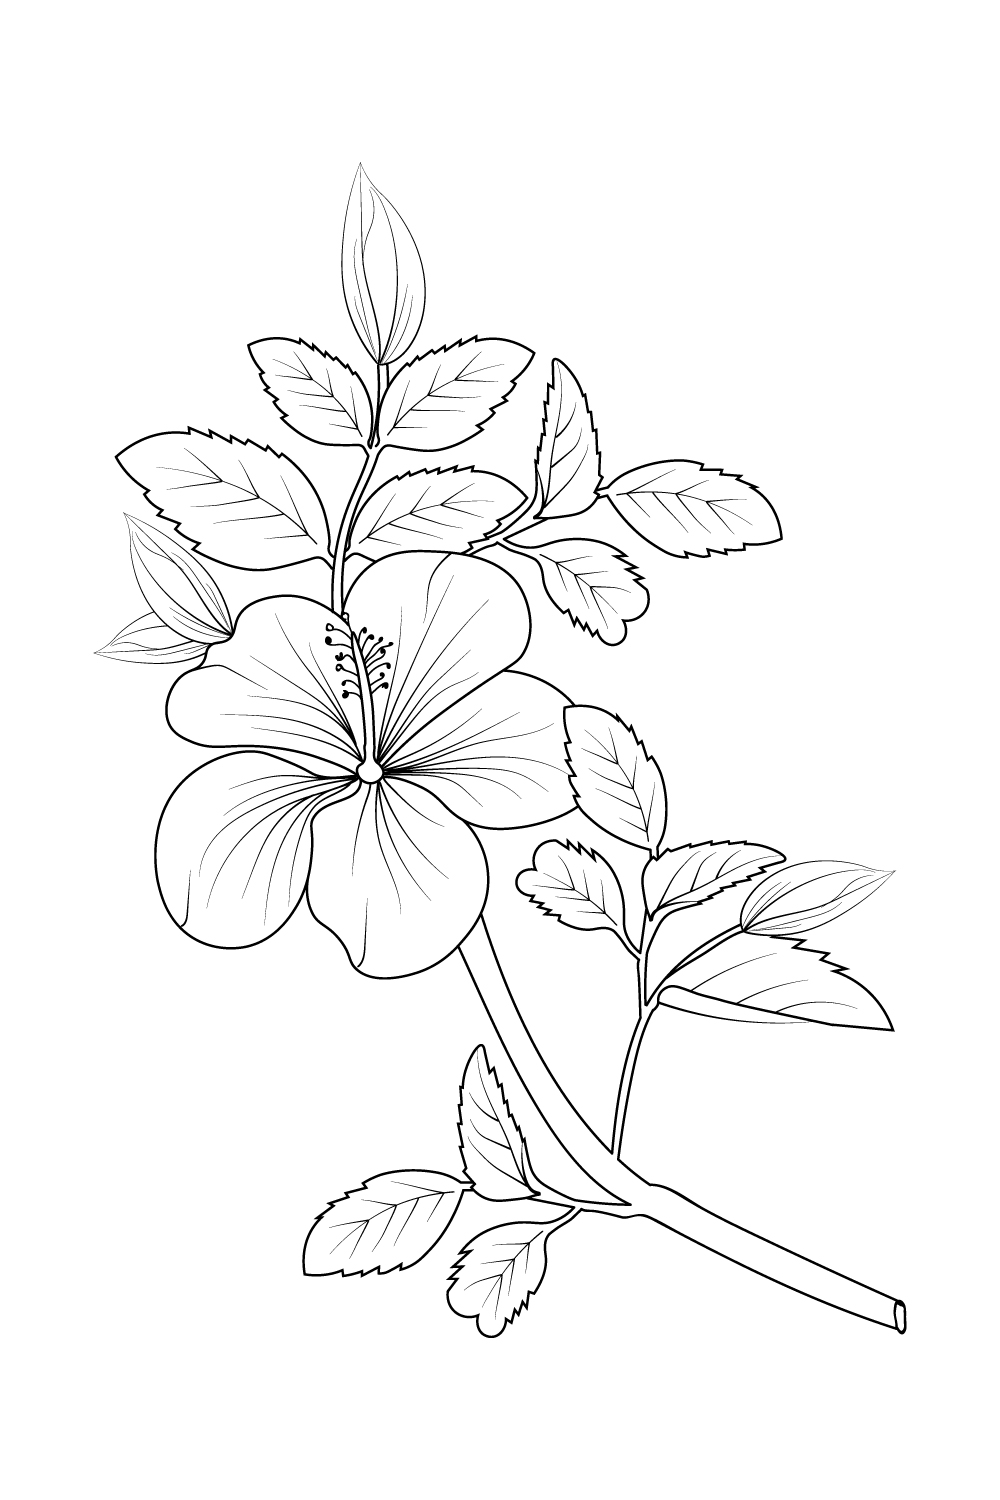 Botanical hibiscus flower drawing, hibiscus flower vector art, hibiscus flower pencil drawing pinterest preview image.